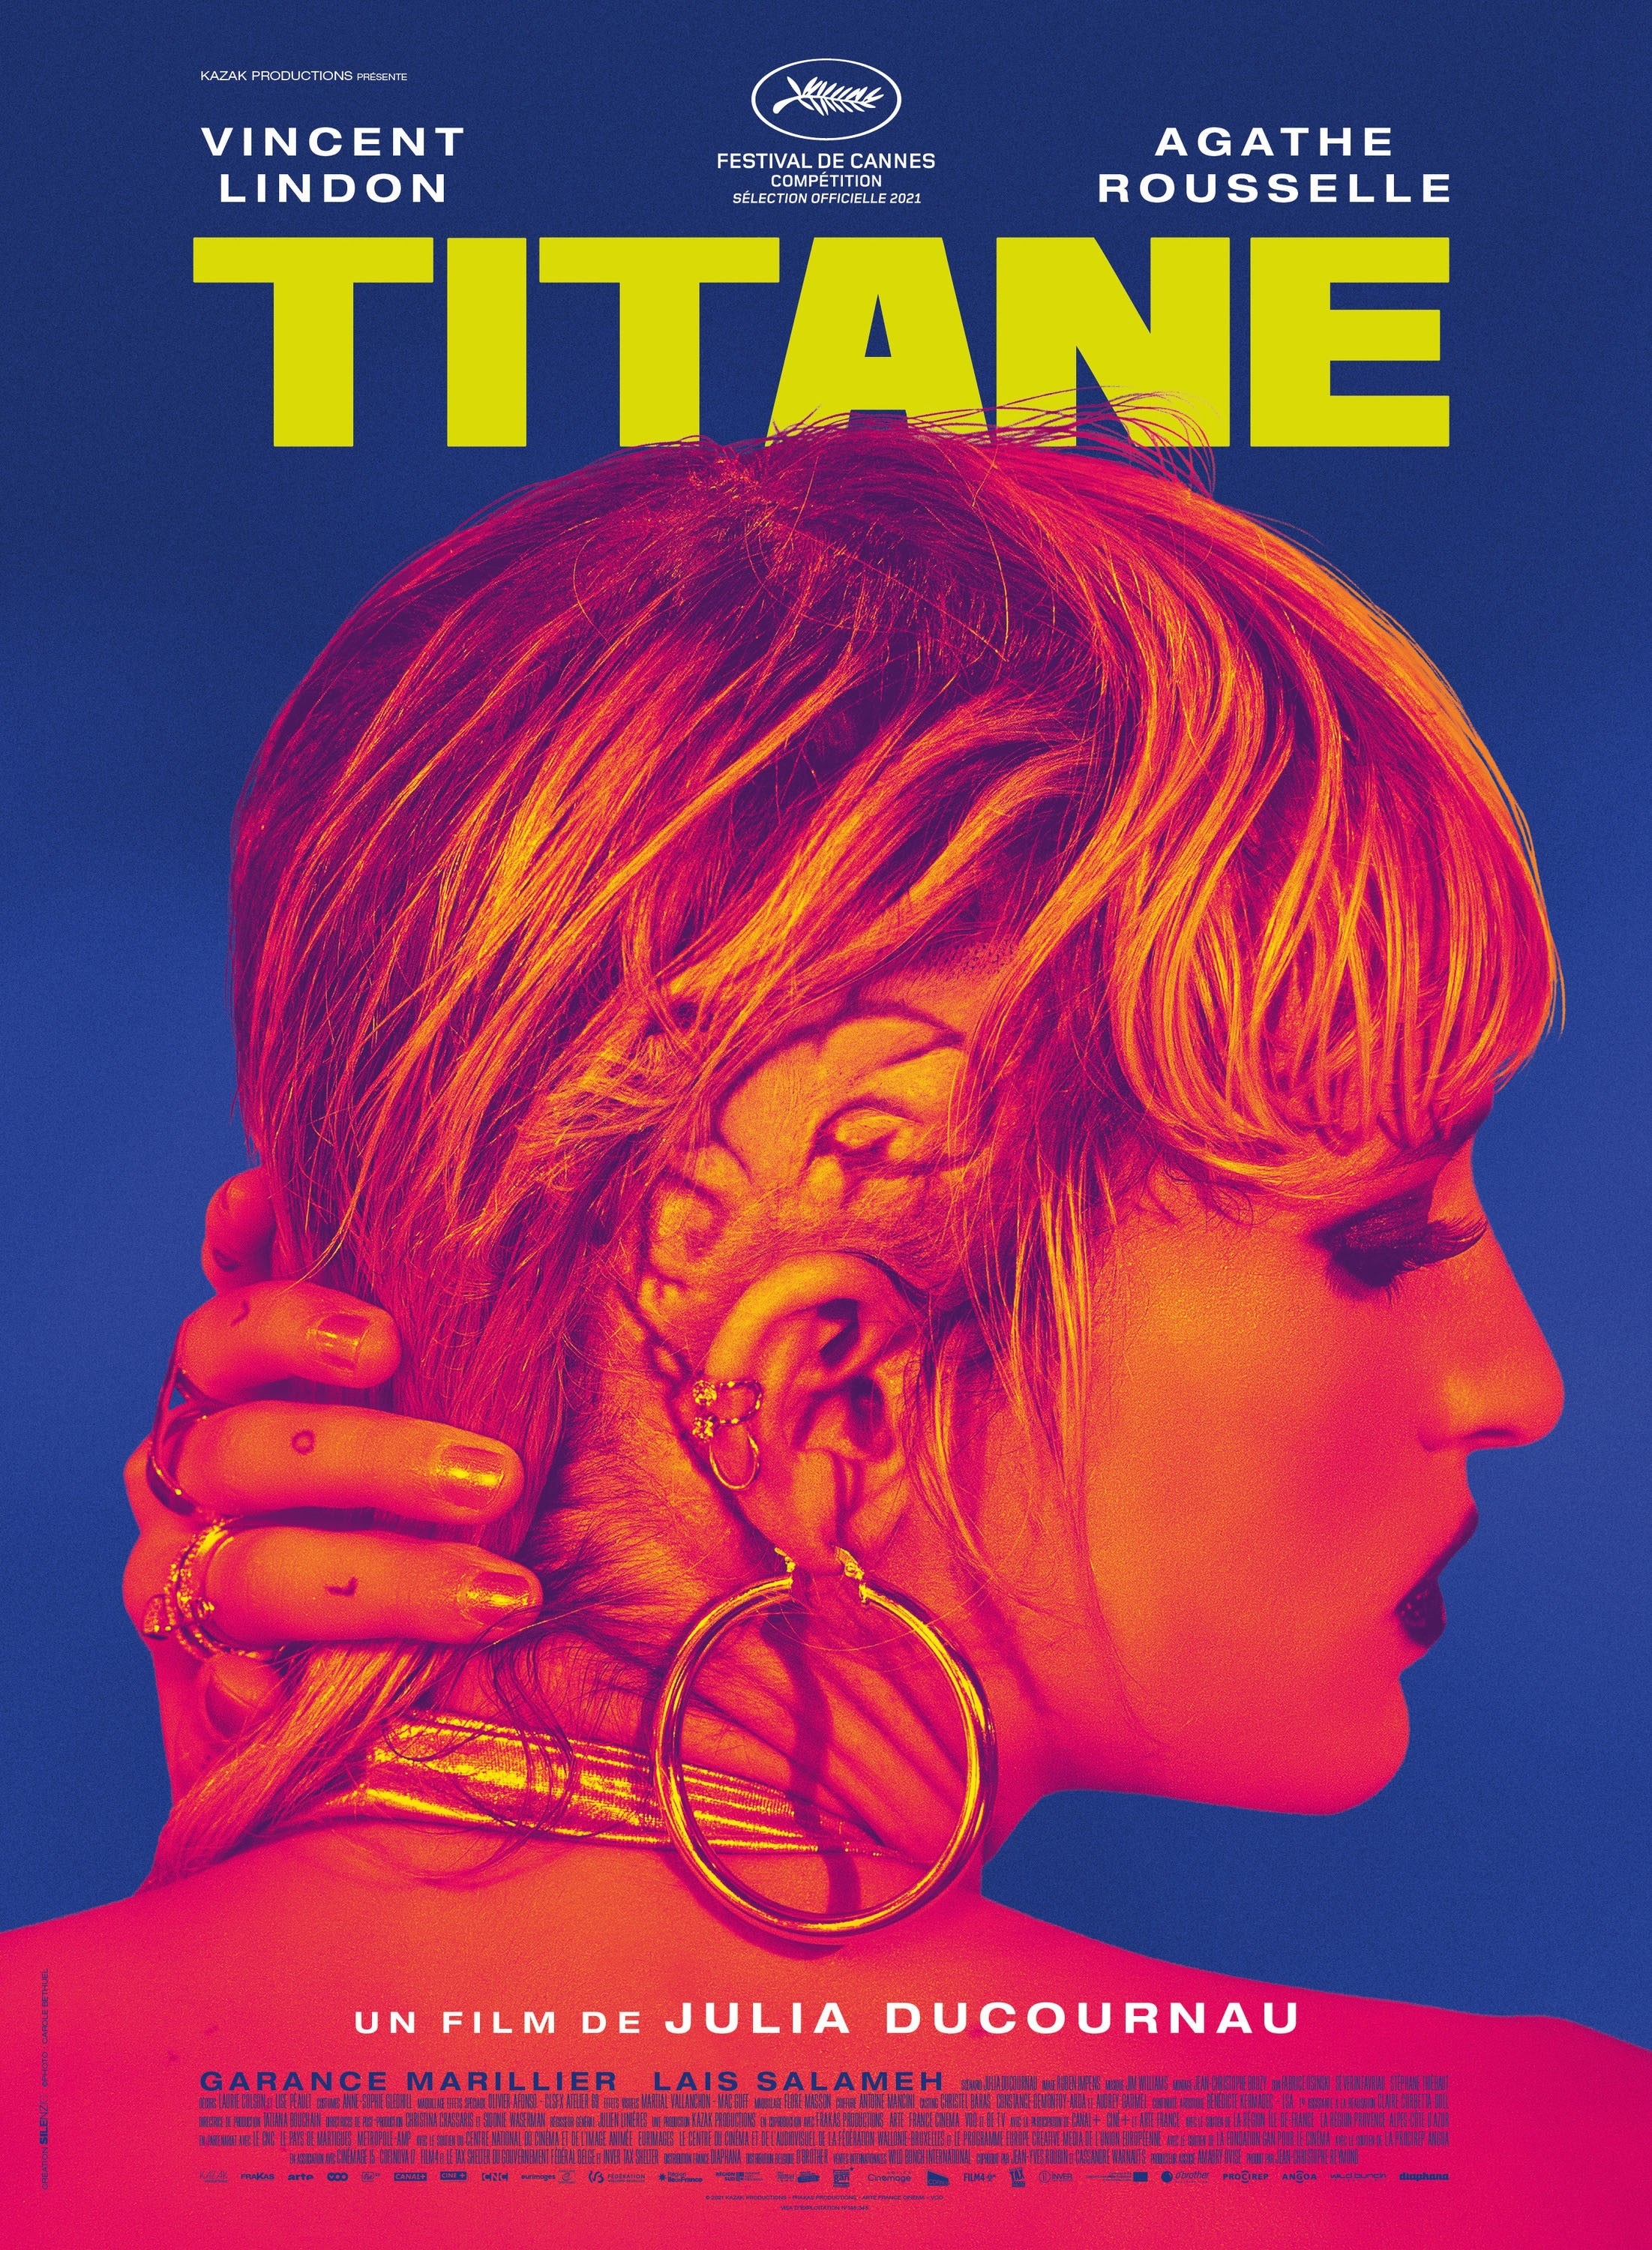 The poster for Titane